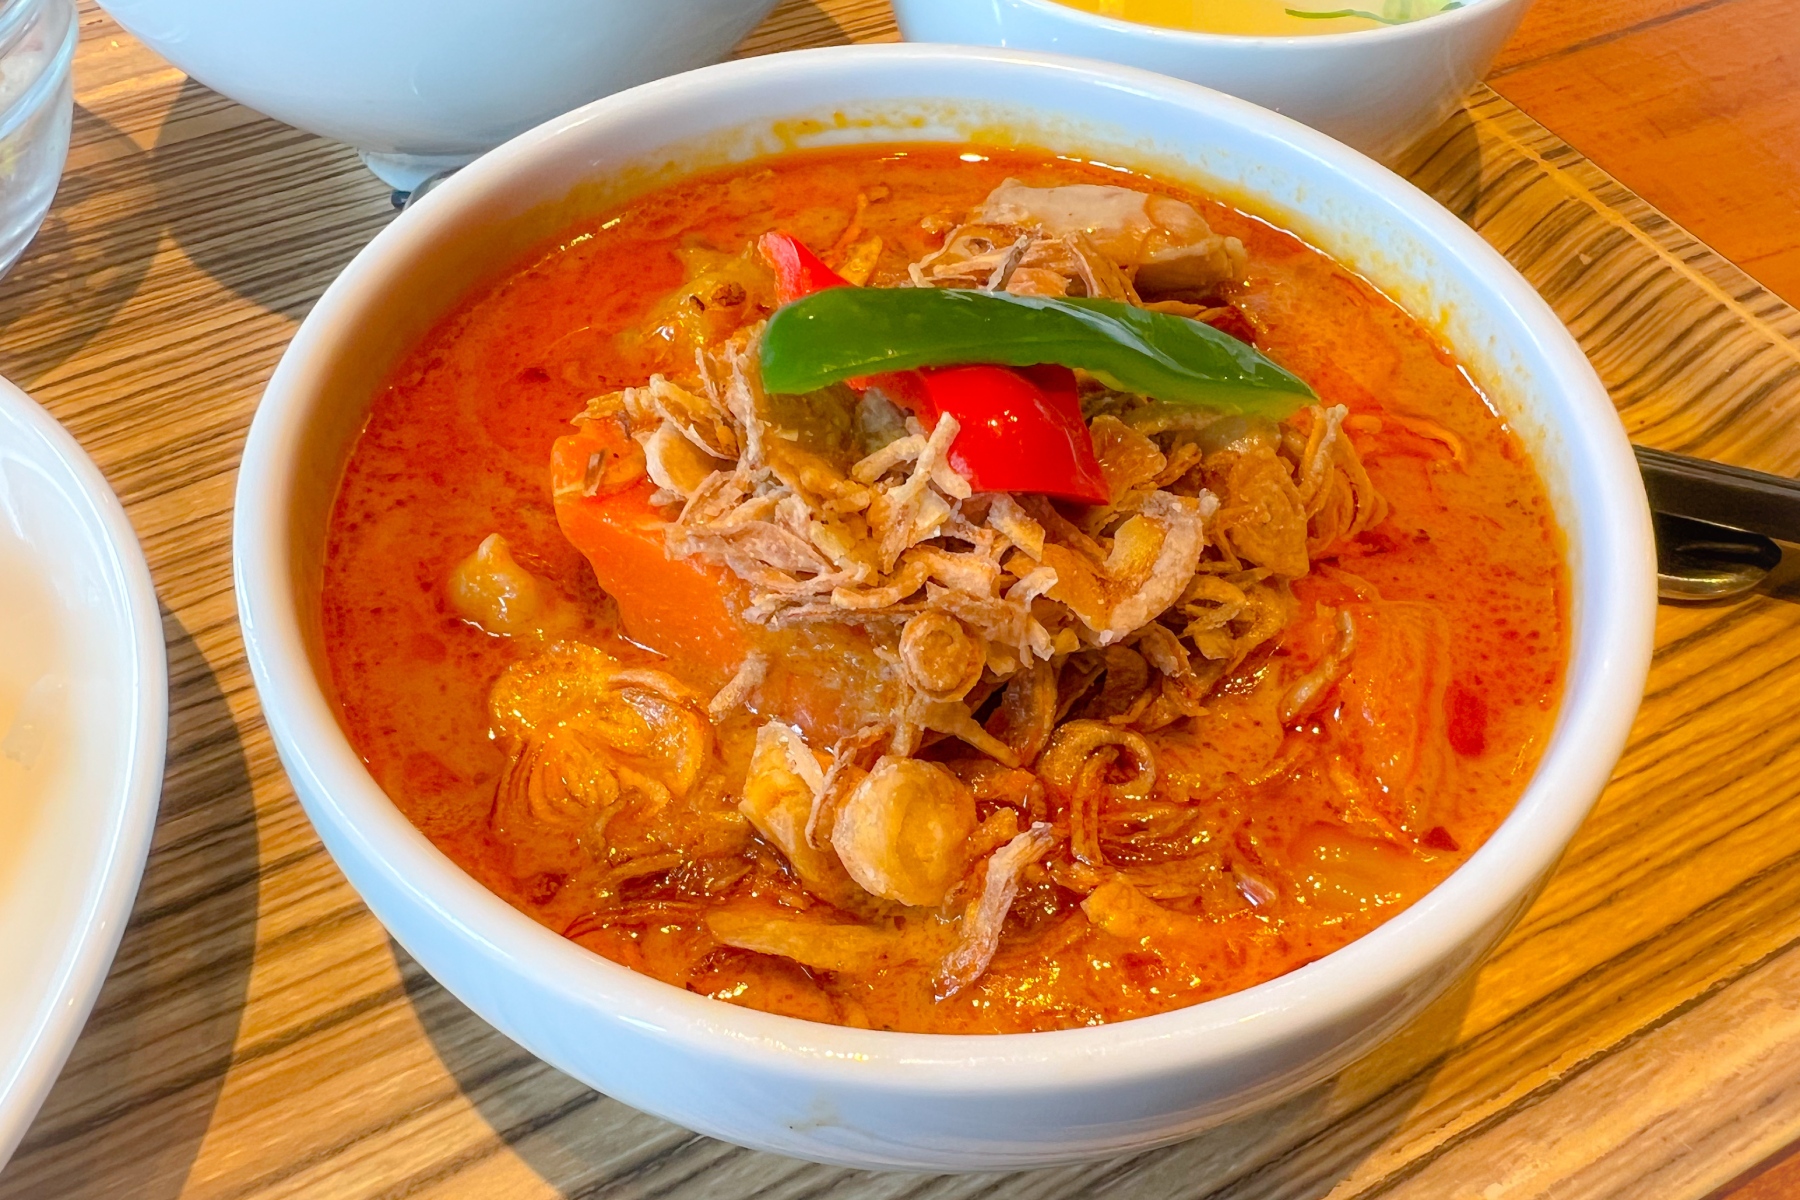 A full bowl of gaeng massaman gai topped with green and red peppers